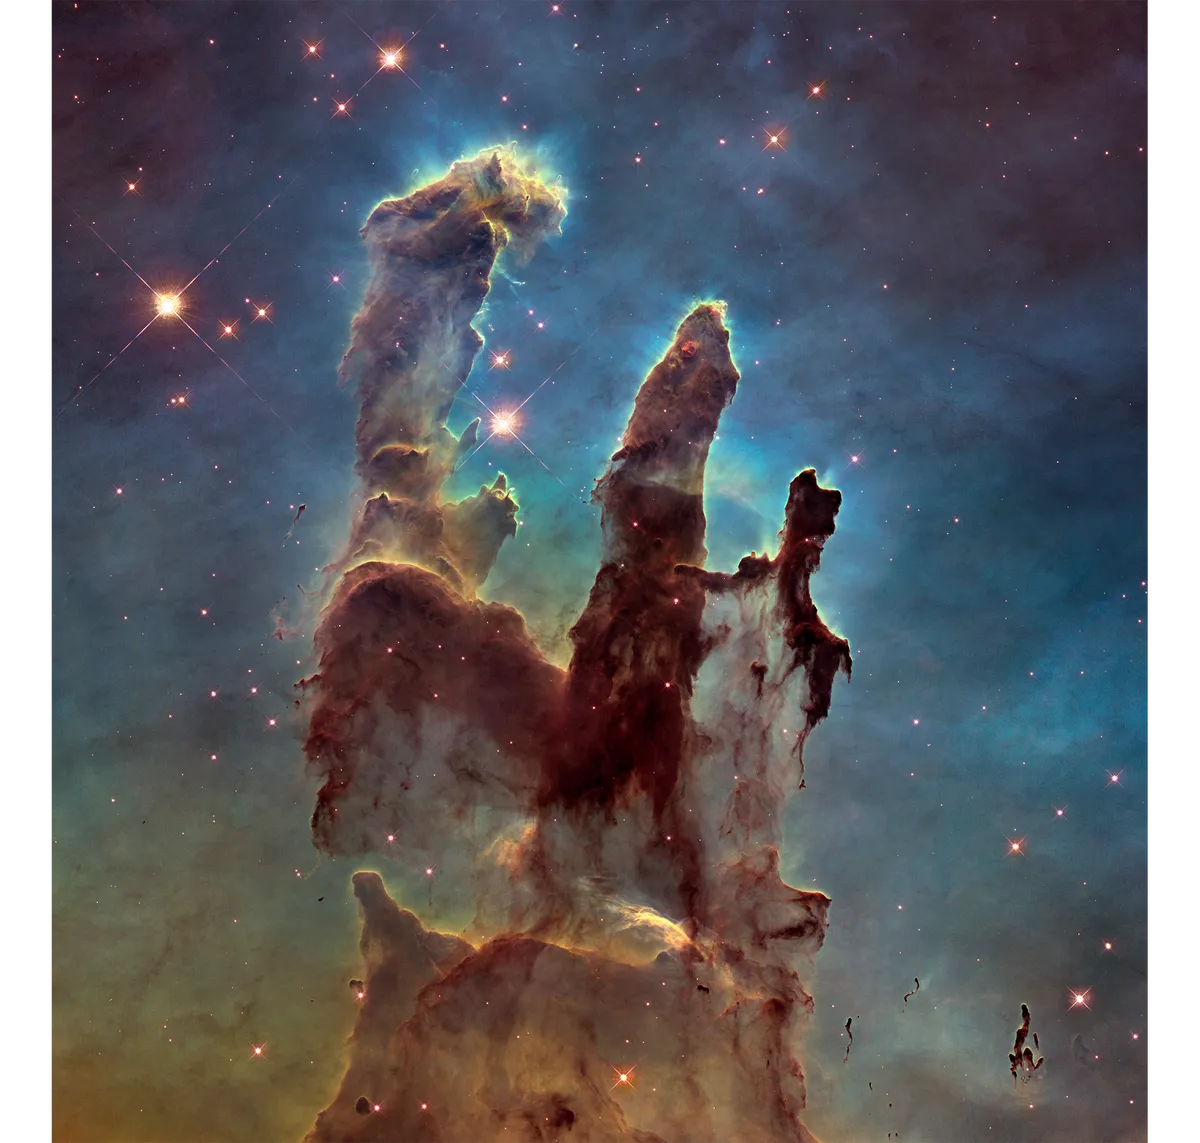 One of Hubble’s most iconic images, the Eagle Nebula’s Pillars of Creation unveils the multicoloured glow of gas clouds interspersed with wispy tendrils of dark cosmic dust. Originally captured in April 1995 (see inset), the new image was released almost 20 years later. It captures more detail on the rust-coloured elephant trunks of the nebula’s legendary pillars. The dust and gas in these is seared by the radiation from nearby young stars. The nebula is 7,000 lightyears away. Credit: NASA, ESA/Hubble and the Hubble Heritage Team